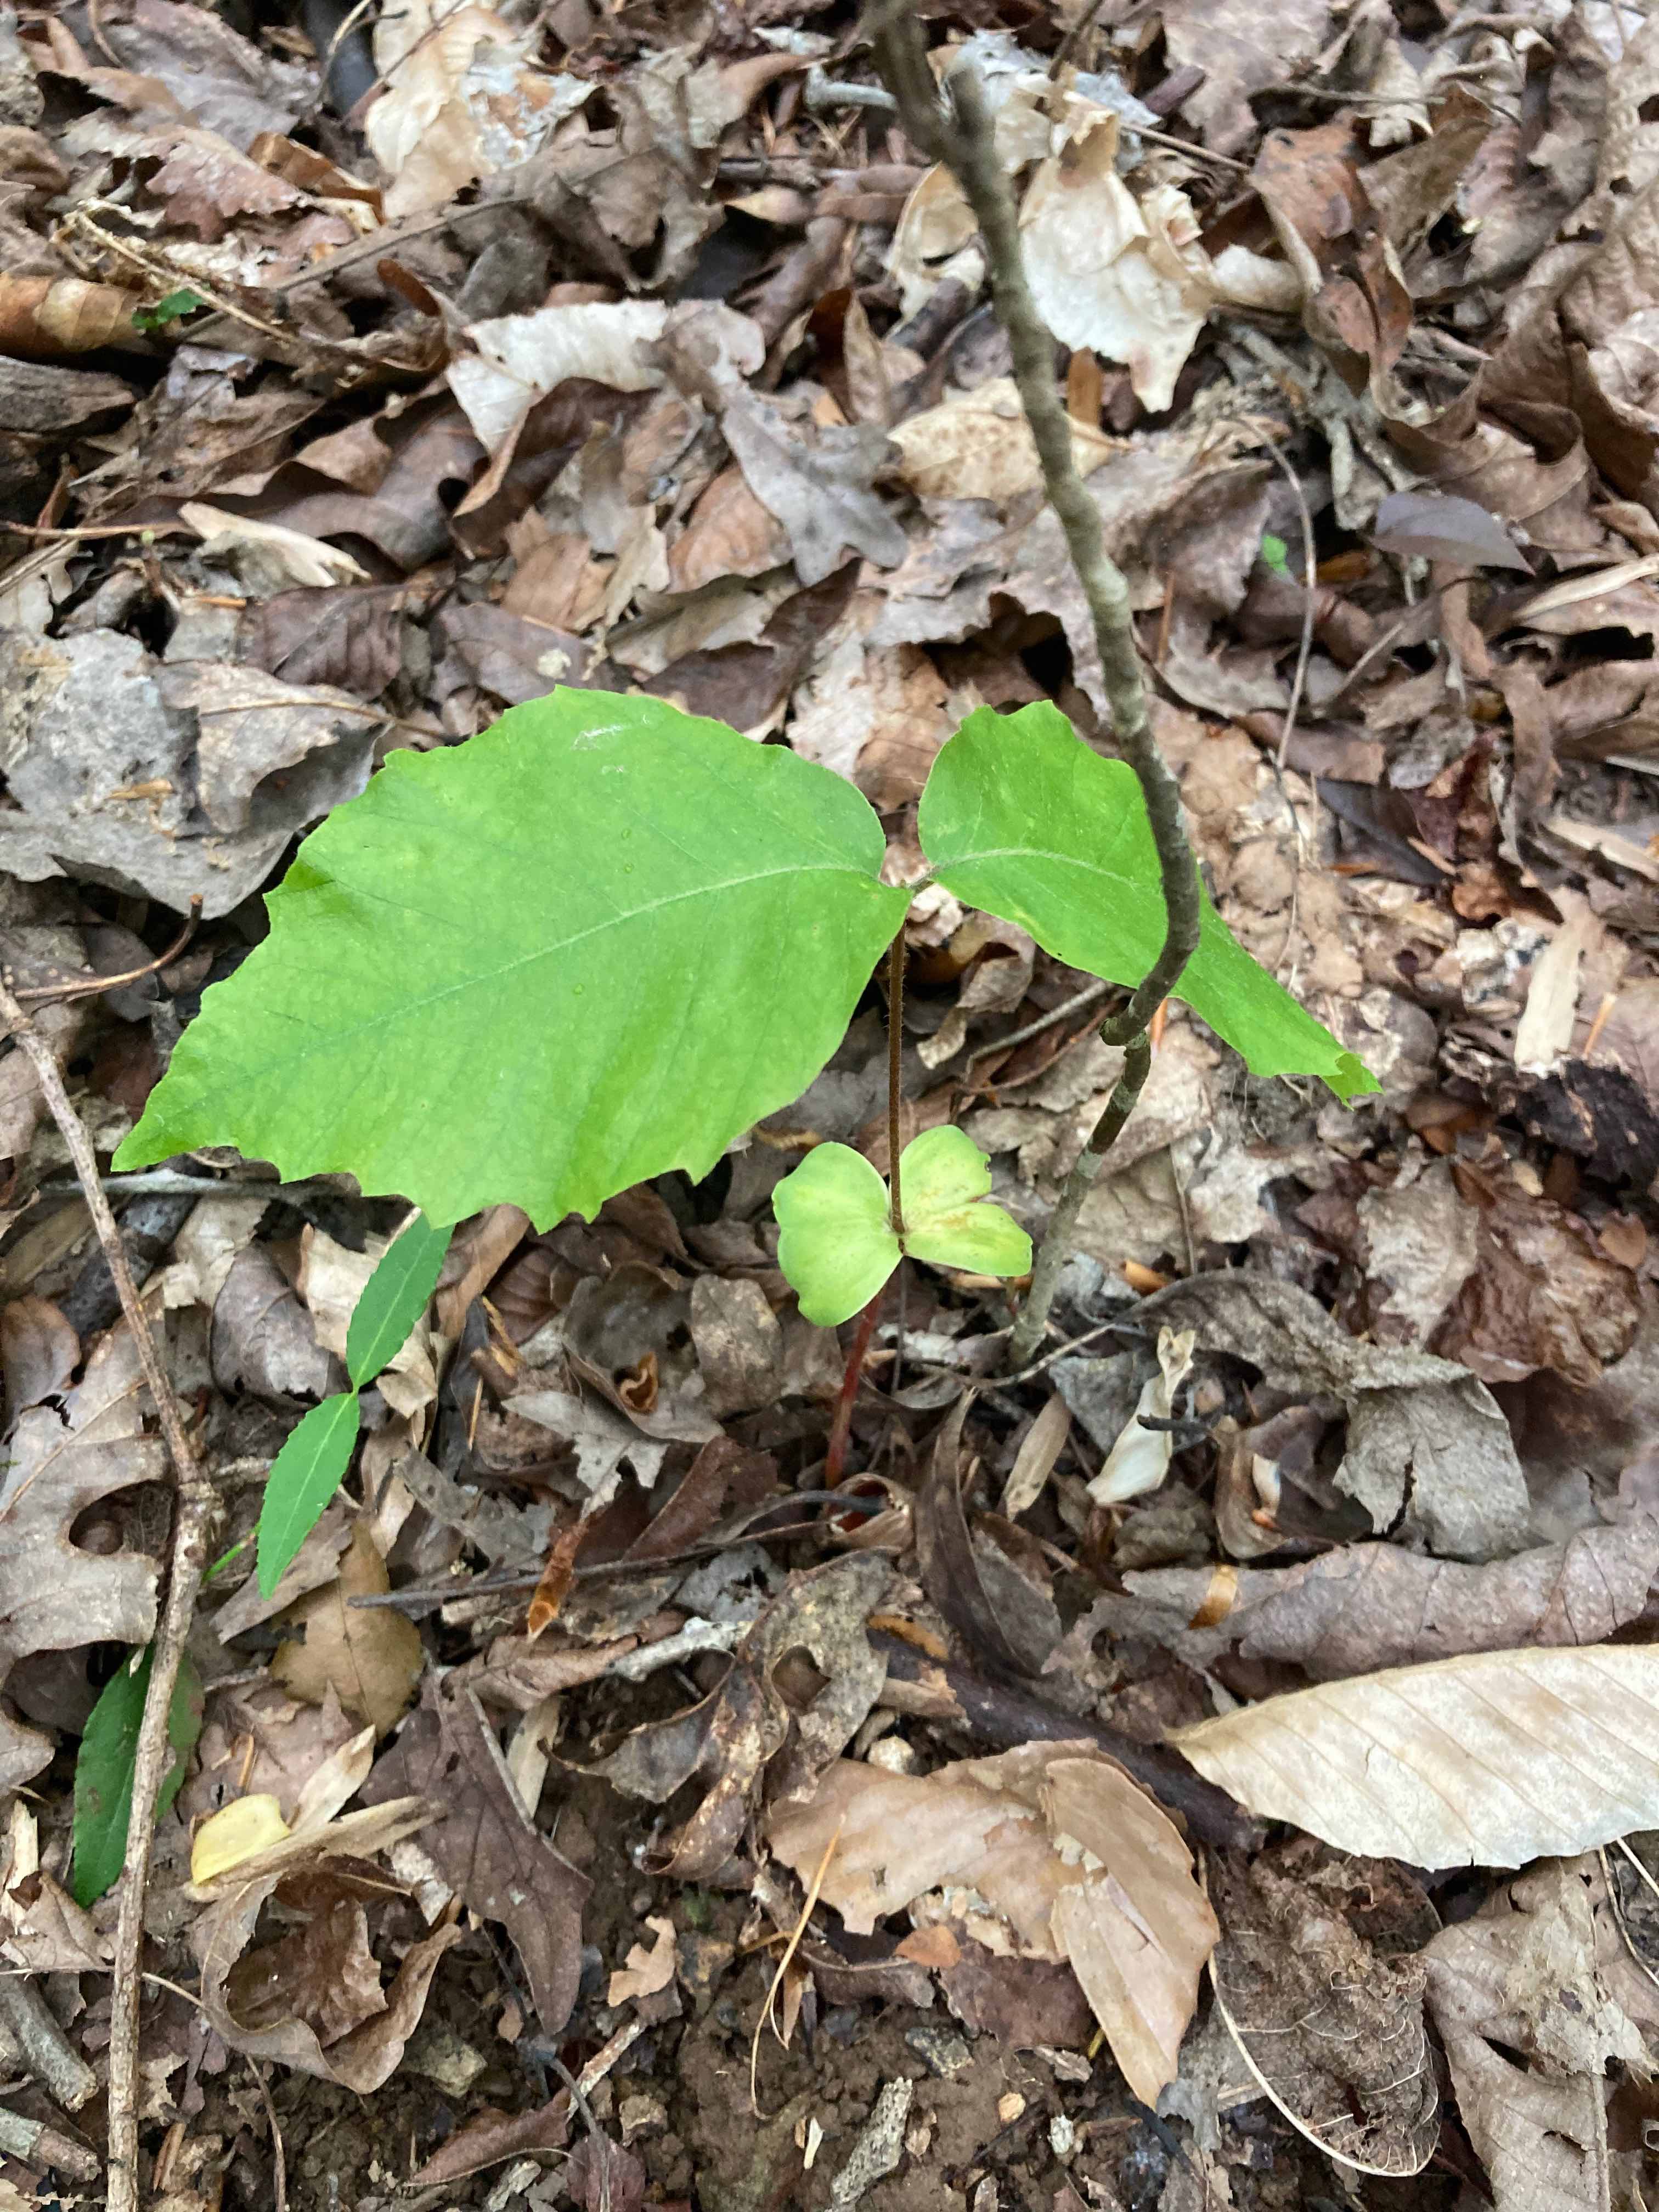 The Scientific Name is Fagus grandifolia. You will likely hear them called American Beech, Gray Beech, Red Beech, White Beech. This picture shows the A little bit older seedling with fully expanded first true leaves. of Fagus grandifolia